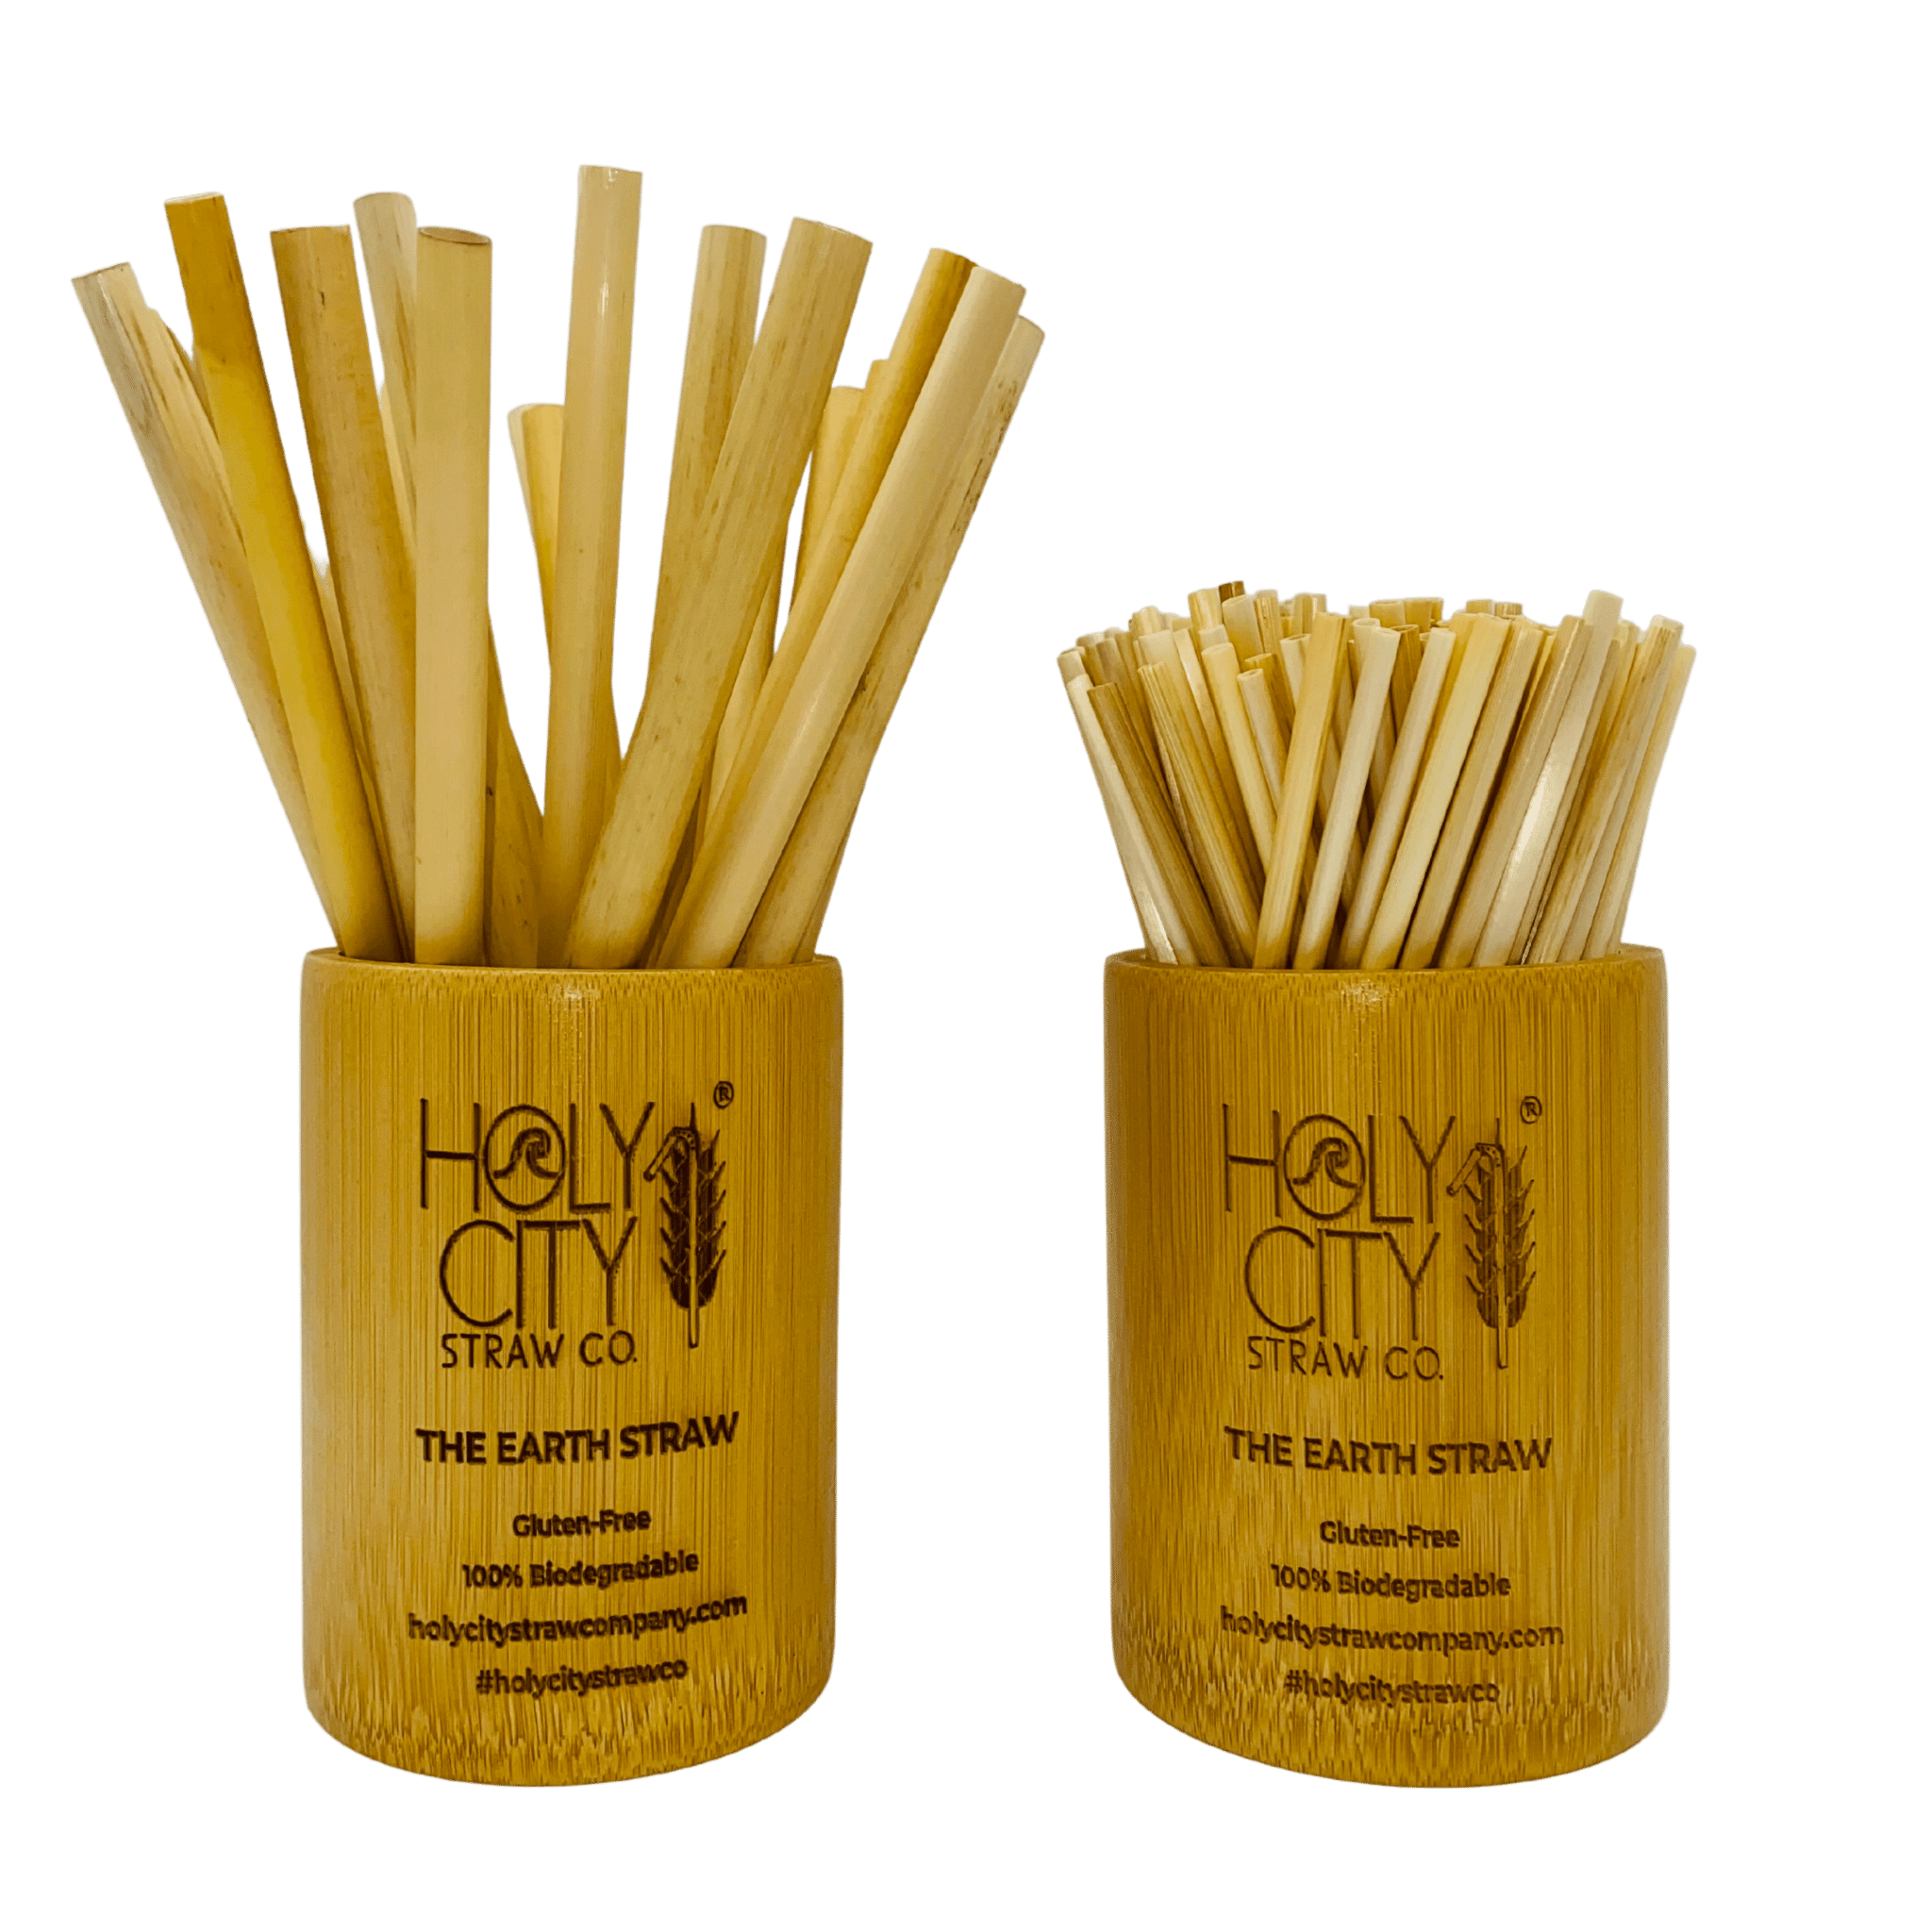 Holy City Straw Company Holders side by side with reed and wheat straws in it